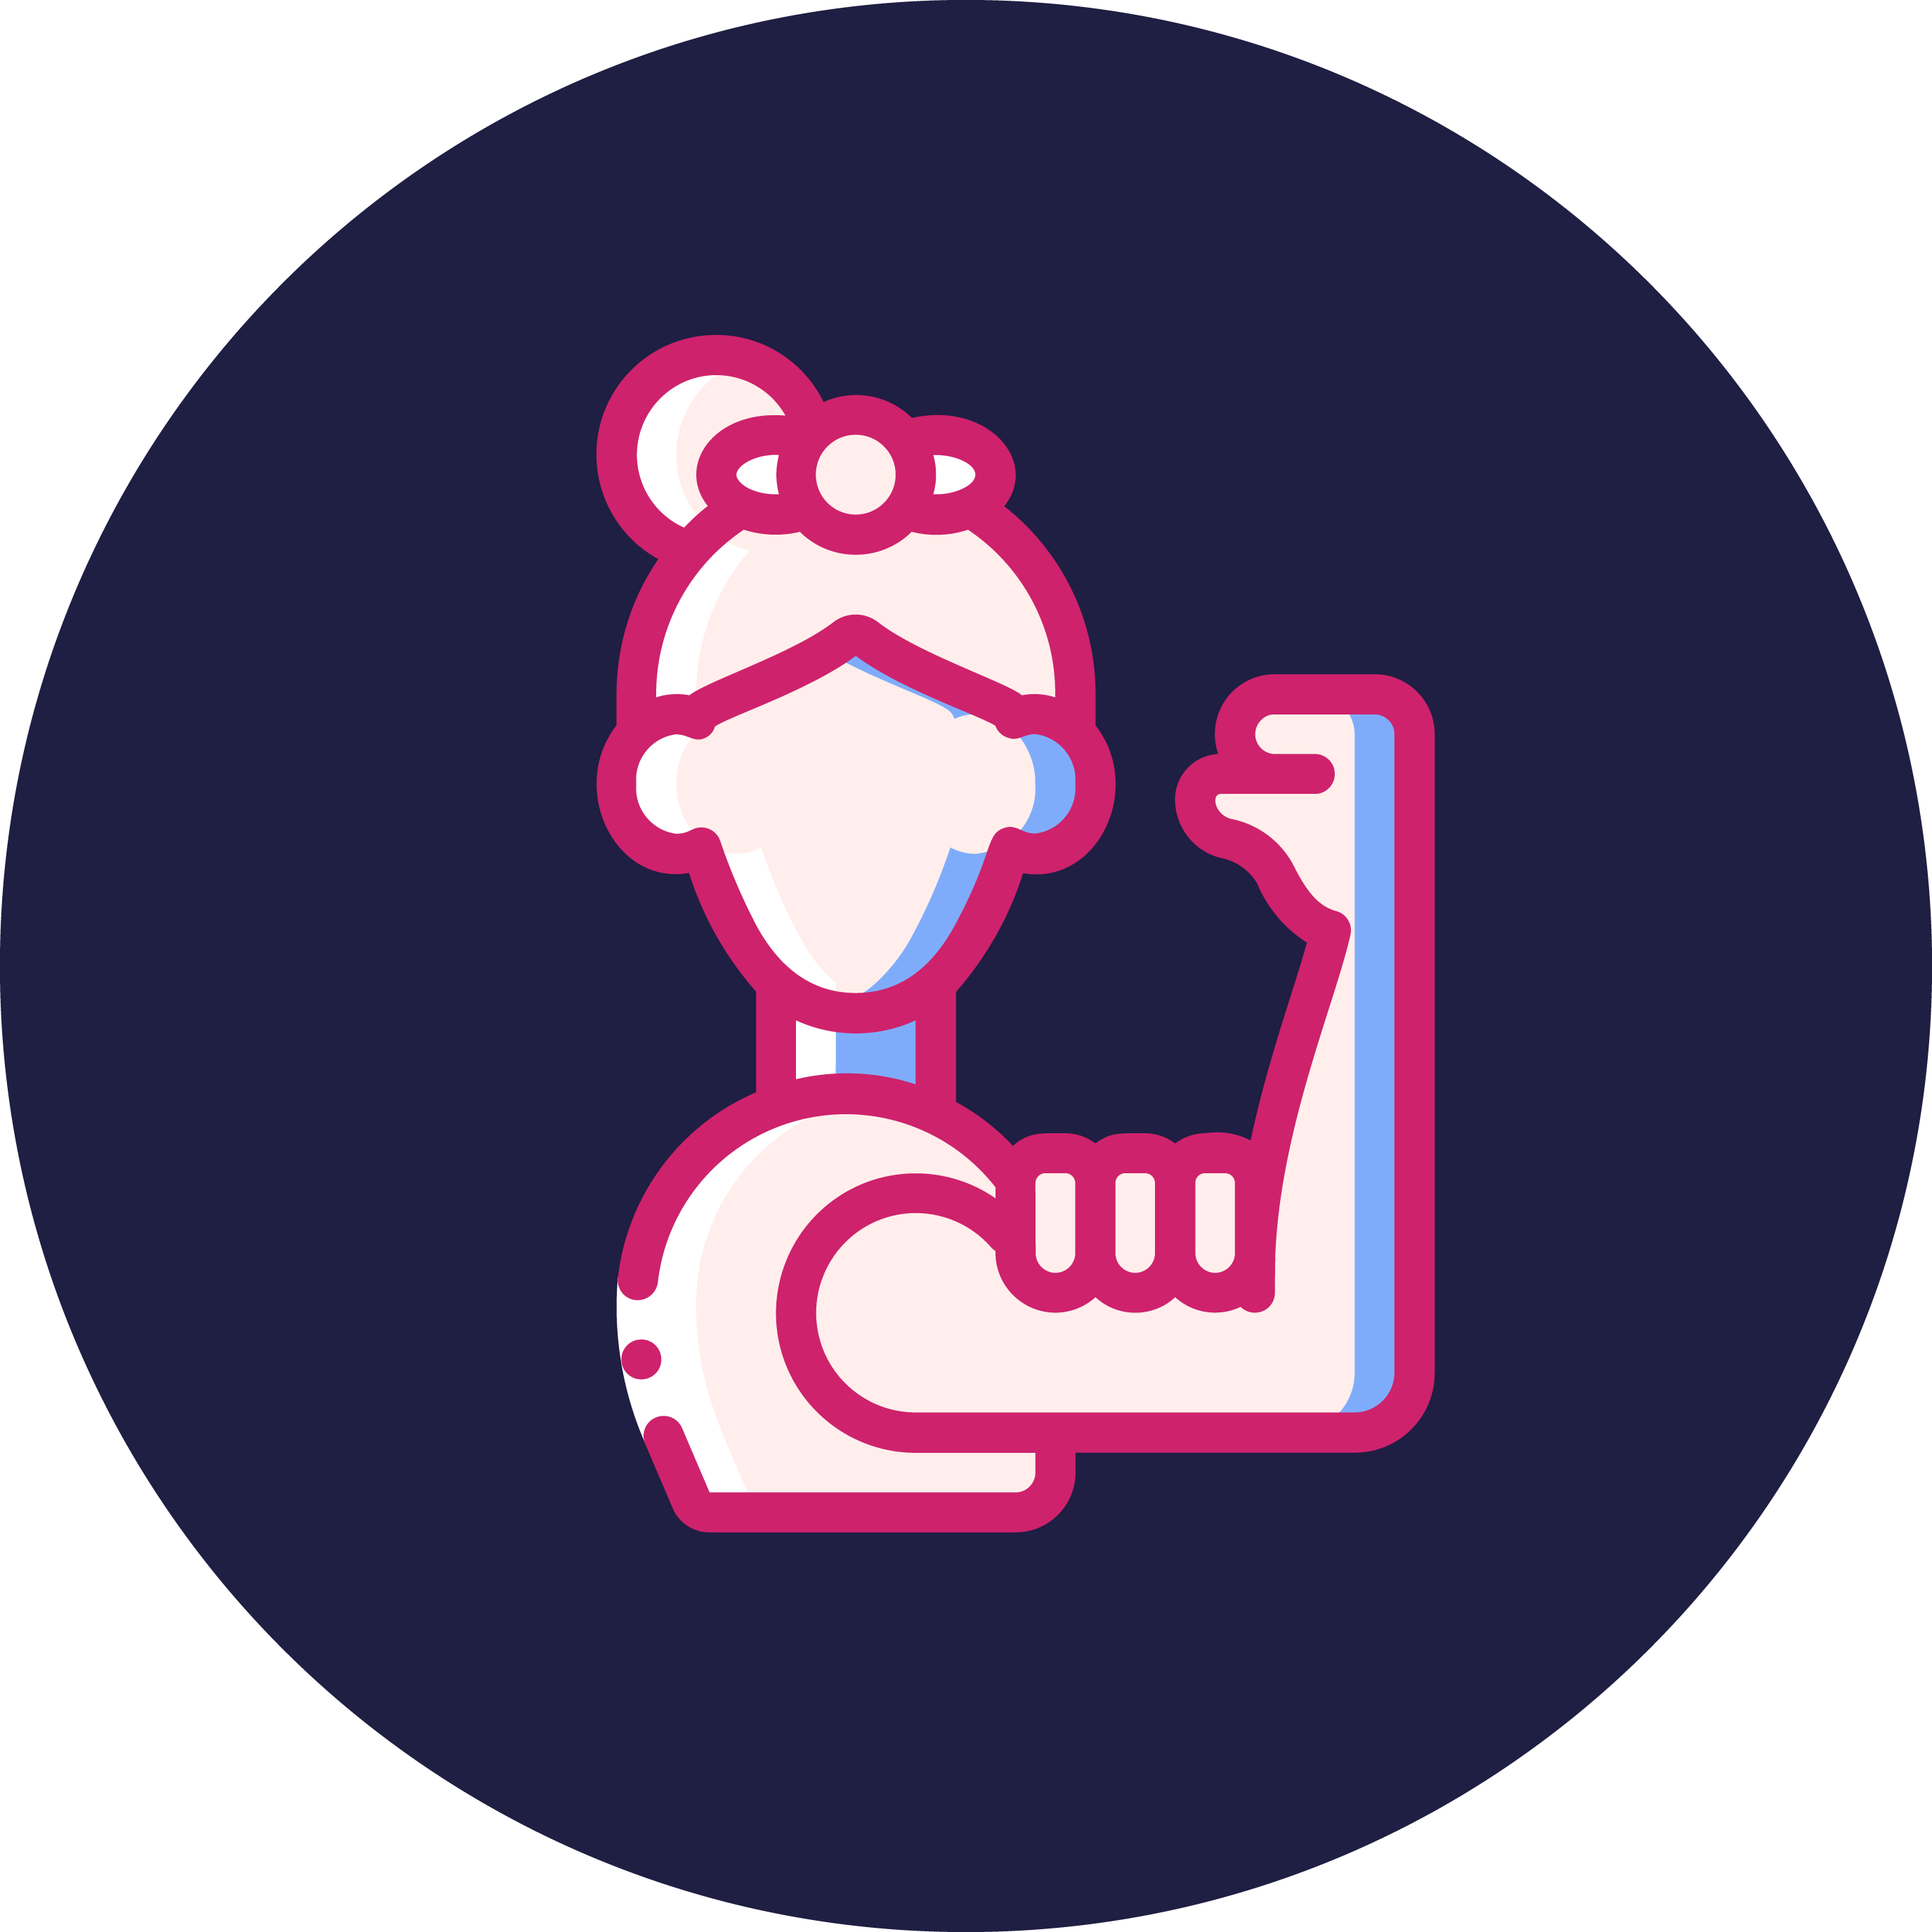 Icon image of a woman with one arm raised holding onto her bicep